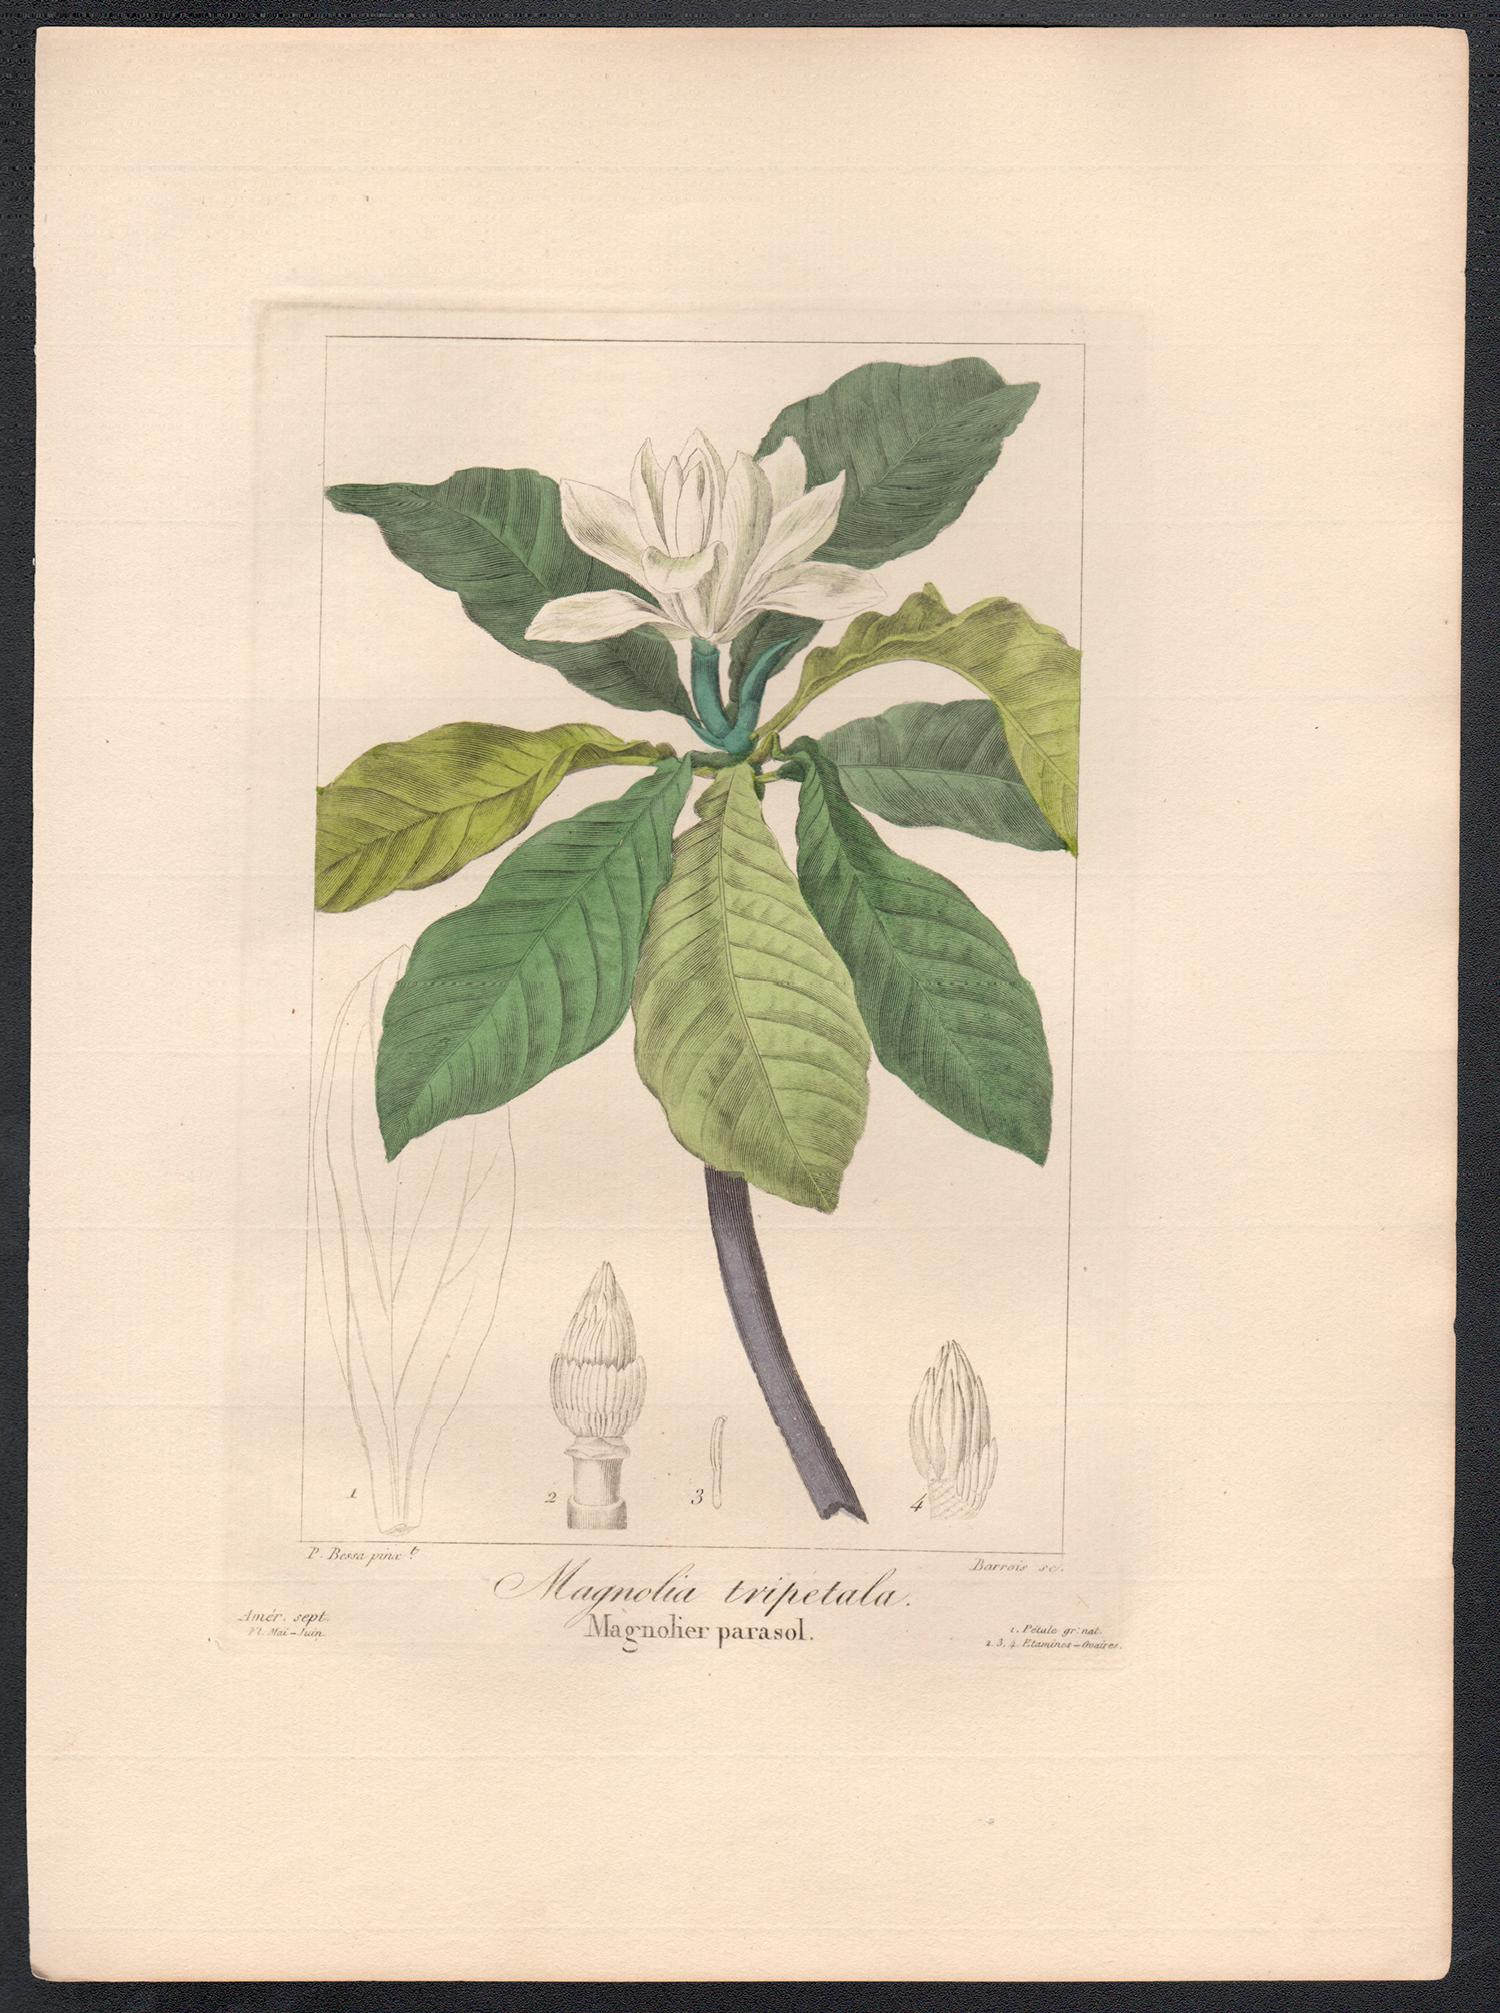 Magnolia tripetala - French botanical flower engraving by Bessa, c1830 - Print by After Pancrace Bessa